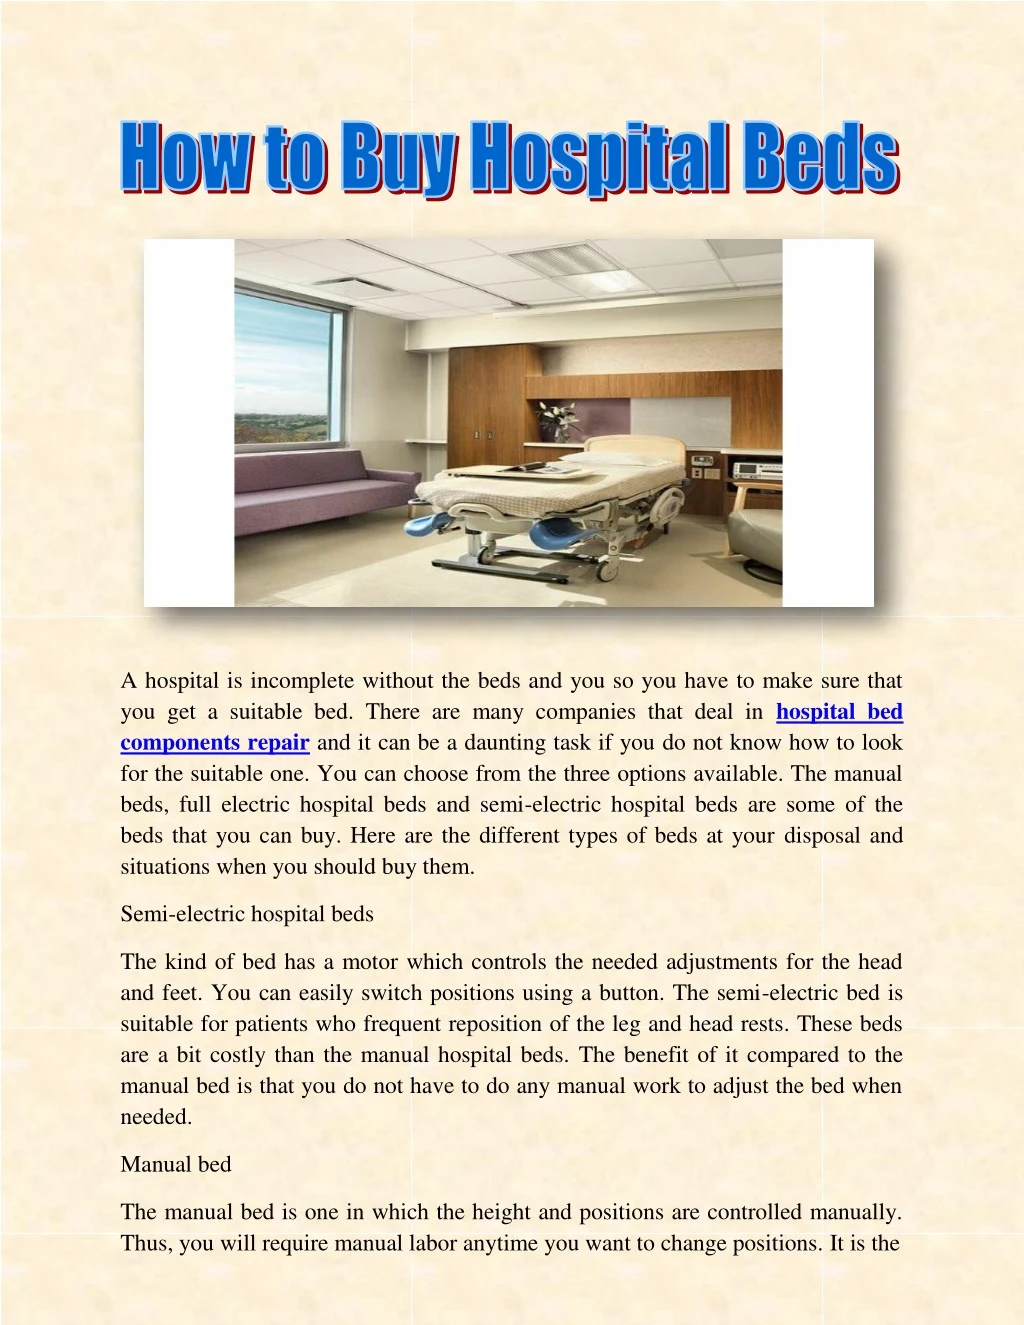 a hospital is incomplete without the beds